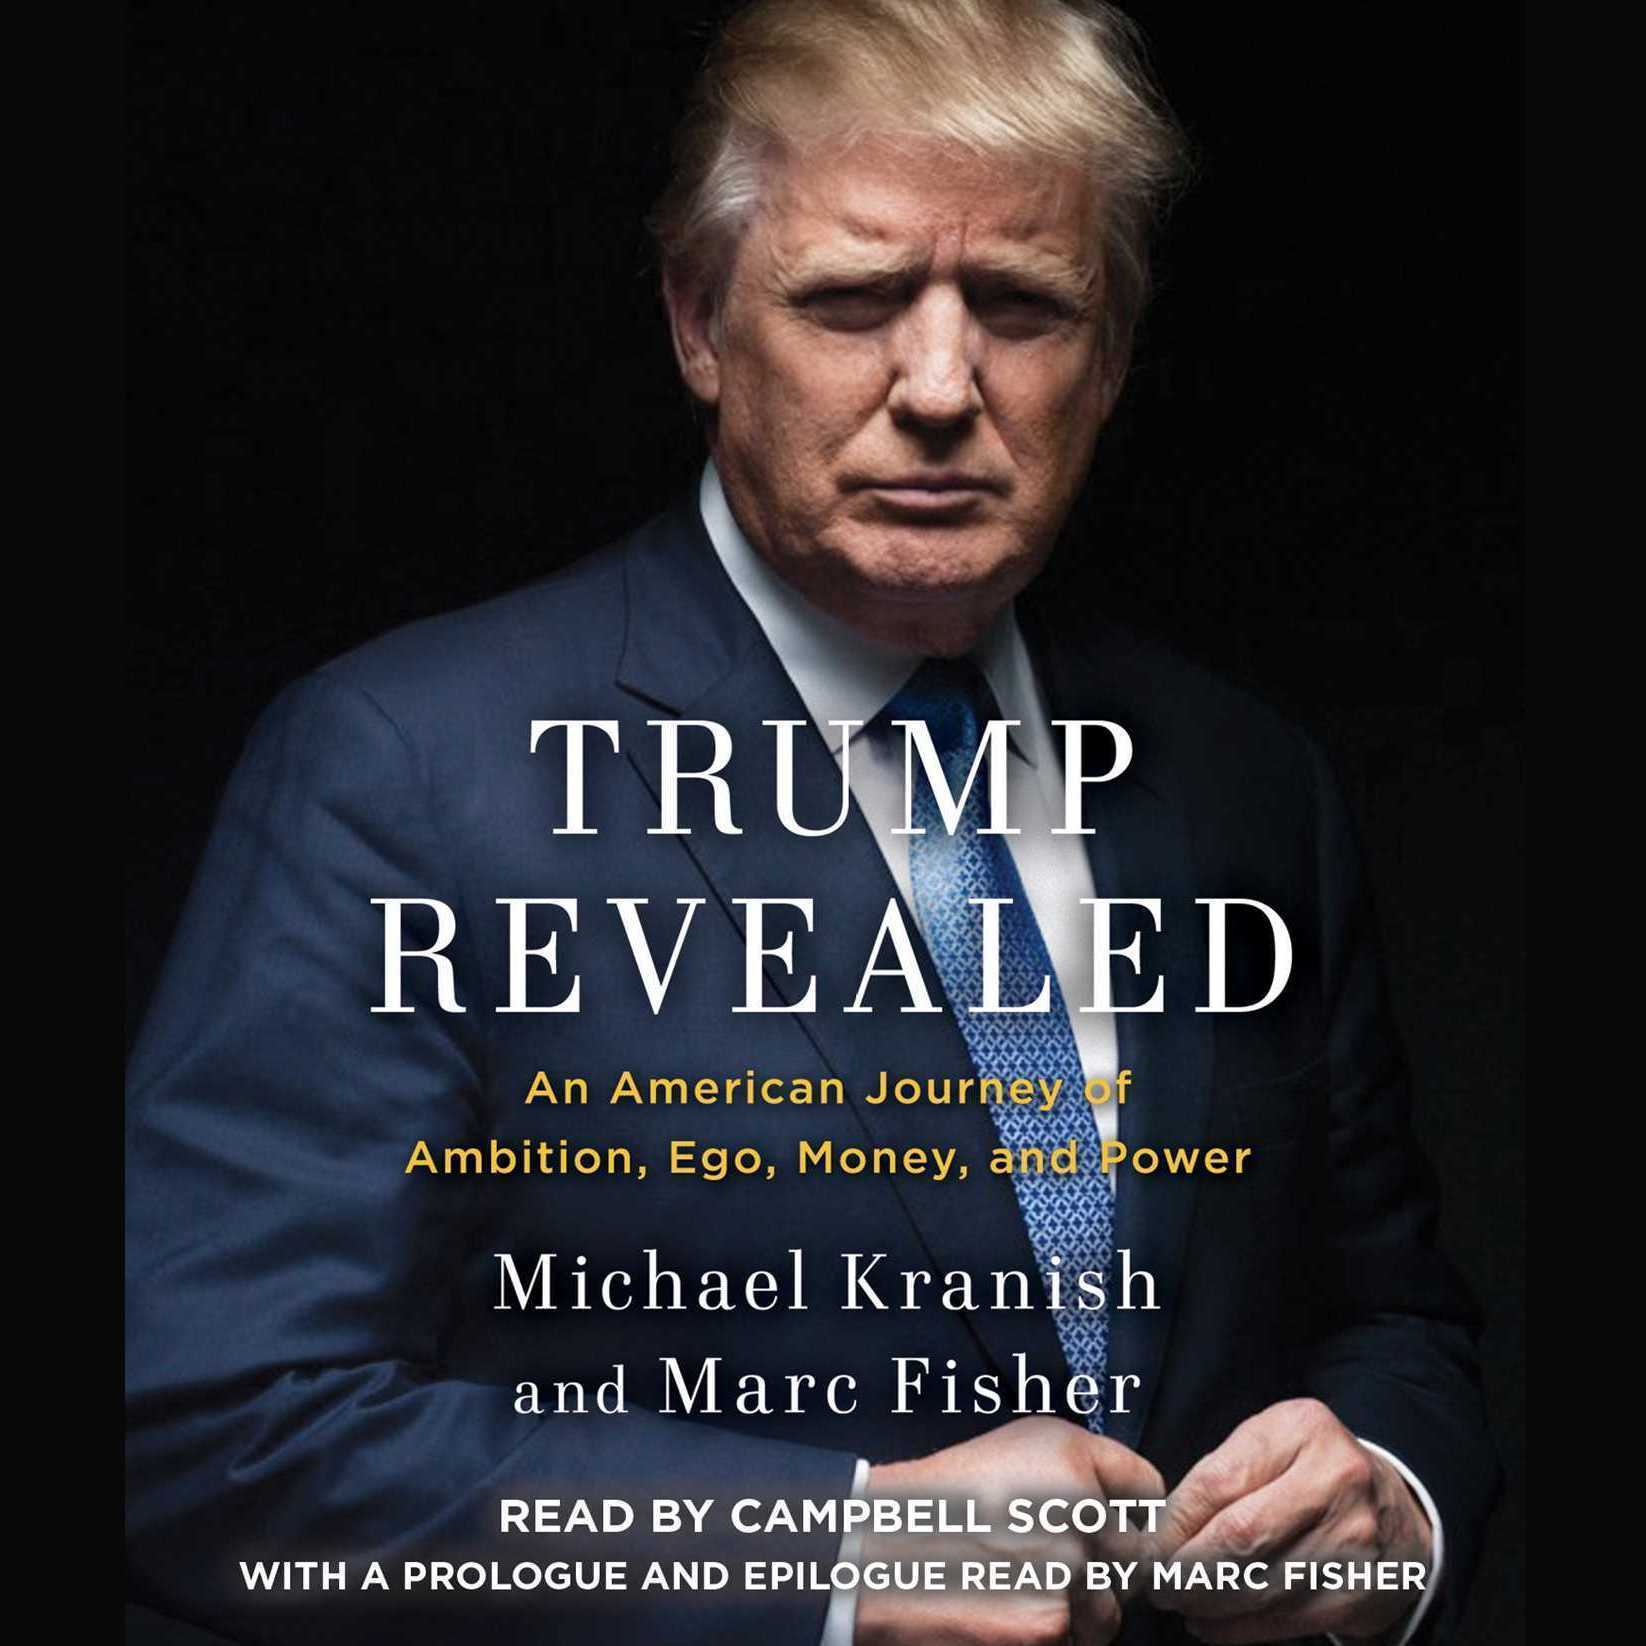 Cover image for the book 'Trump Revealed'